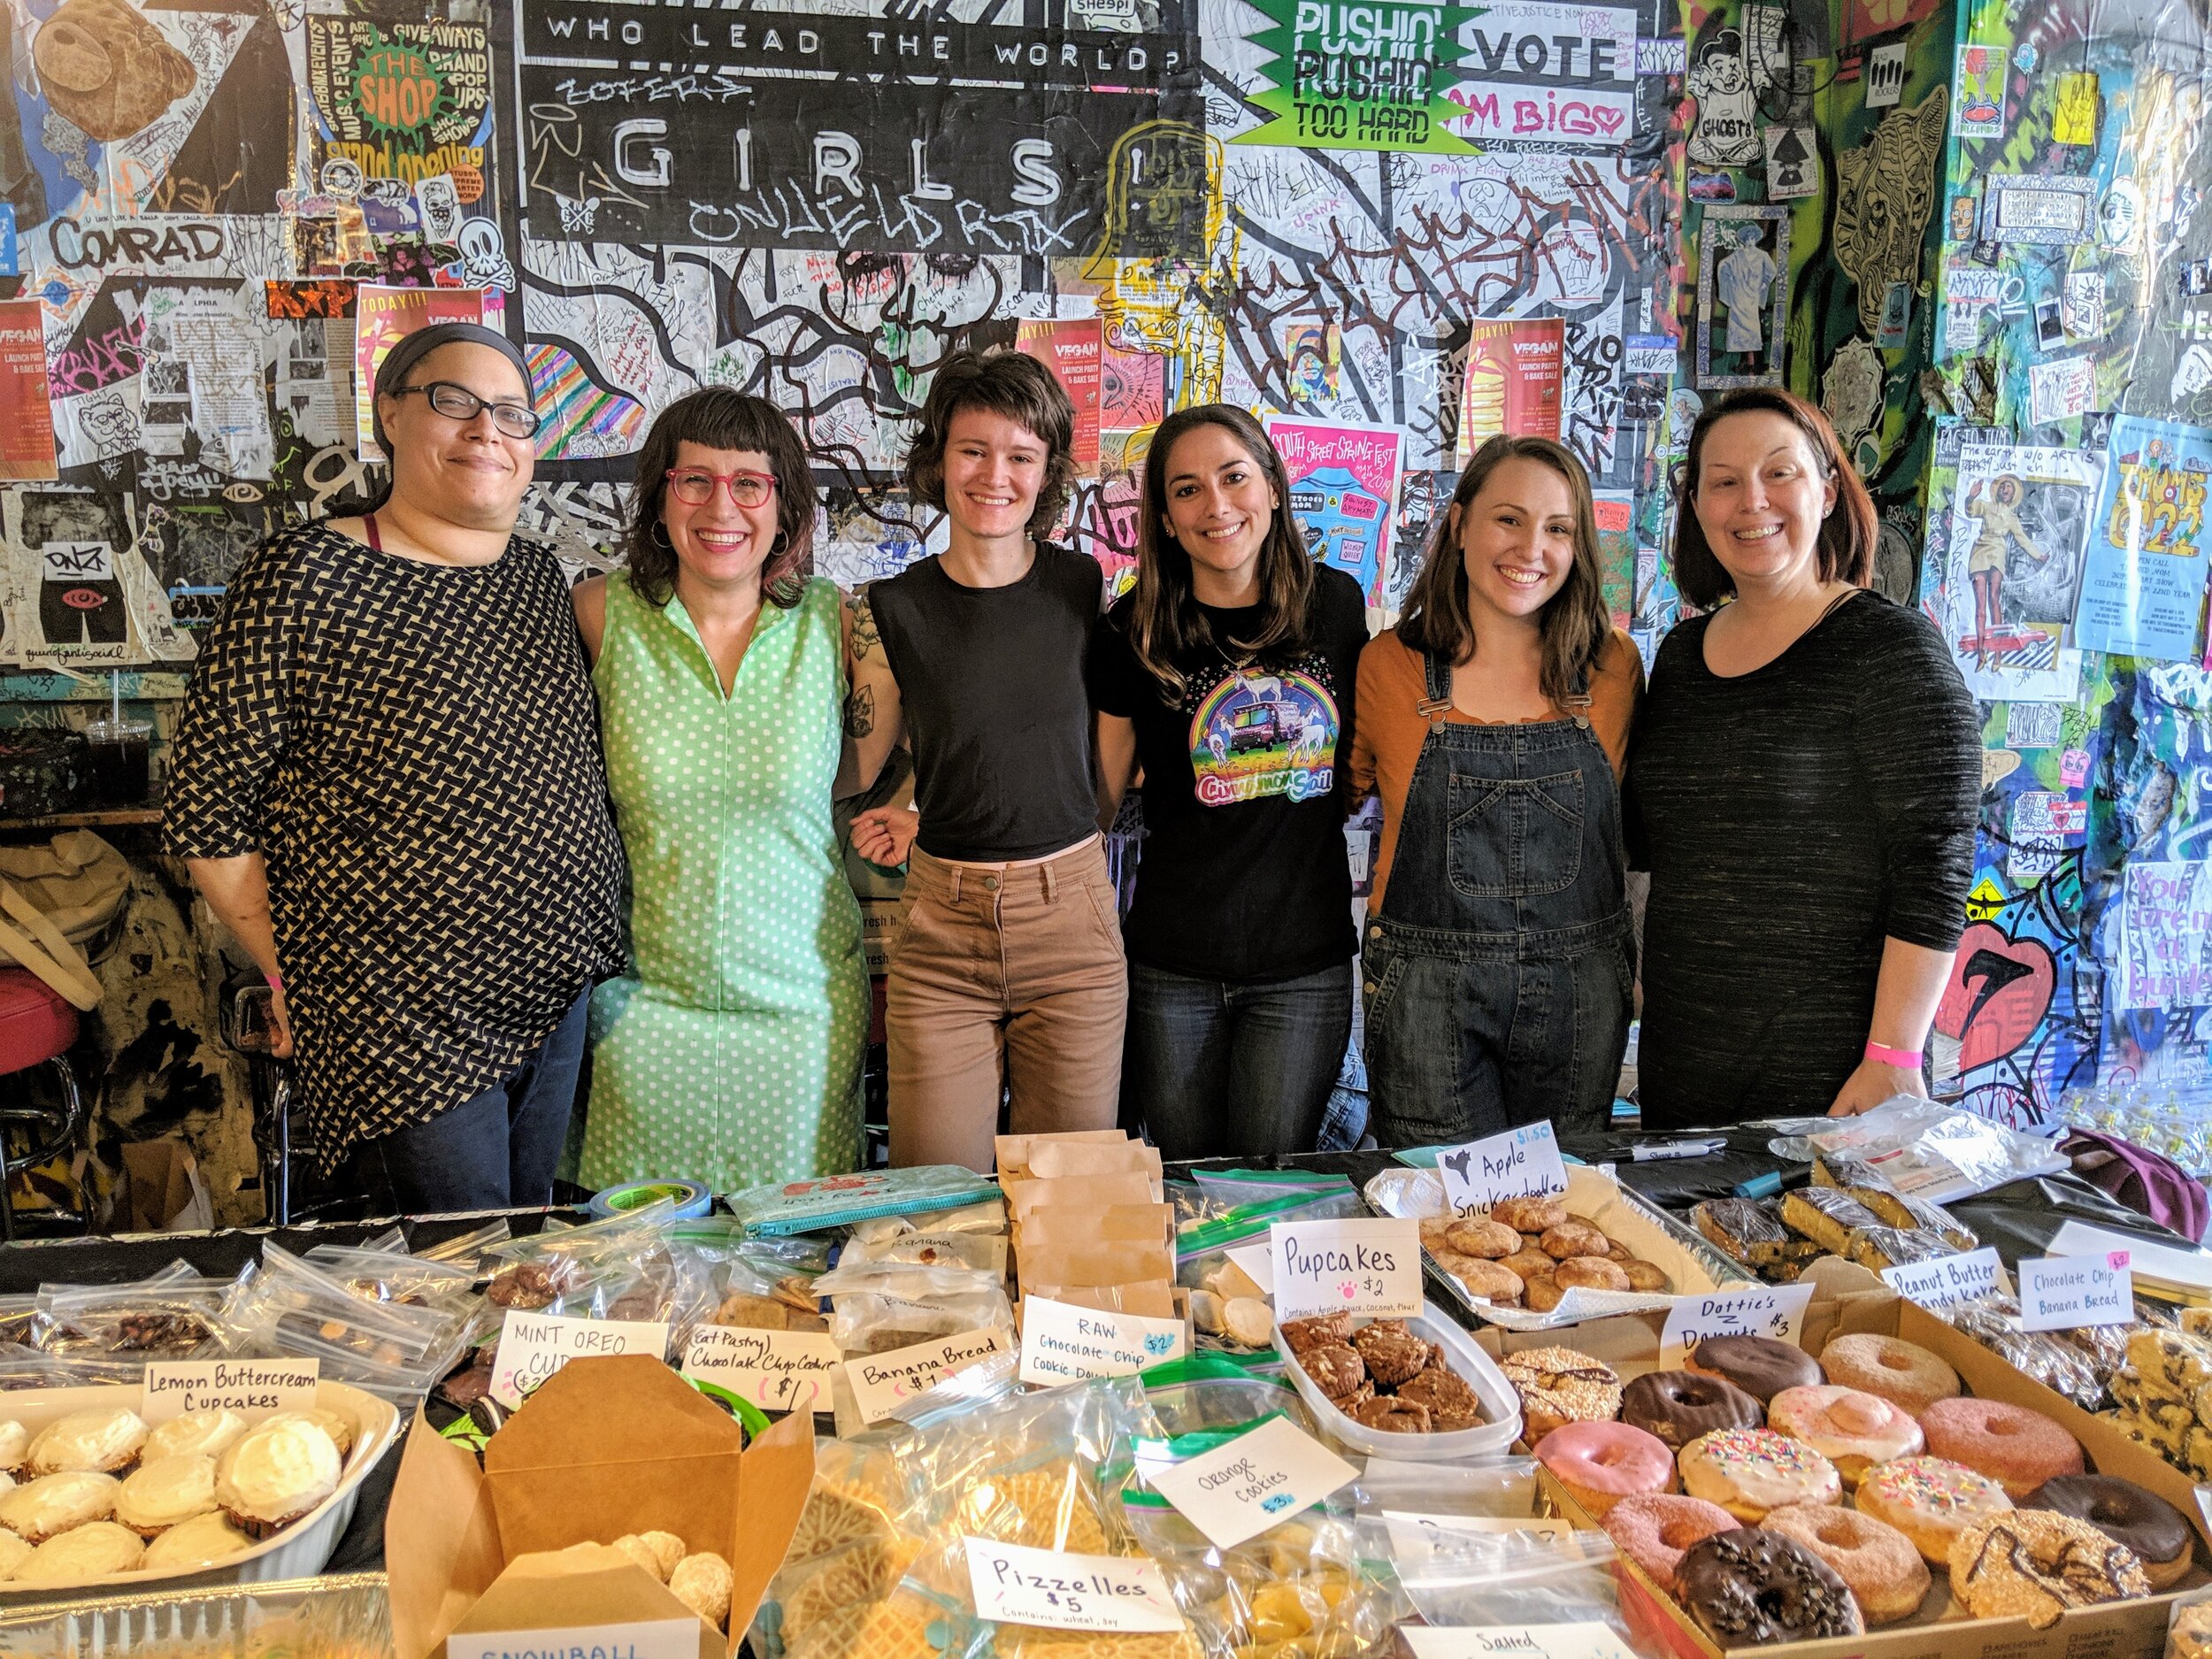 Organizers of Philly Vegan Restaurant Week pictured at one of the fundraiser bake sales at Tattooed Mom. Photographs courtesy of Philly Vegan Restaurant Week organizers.